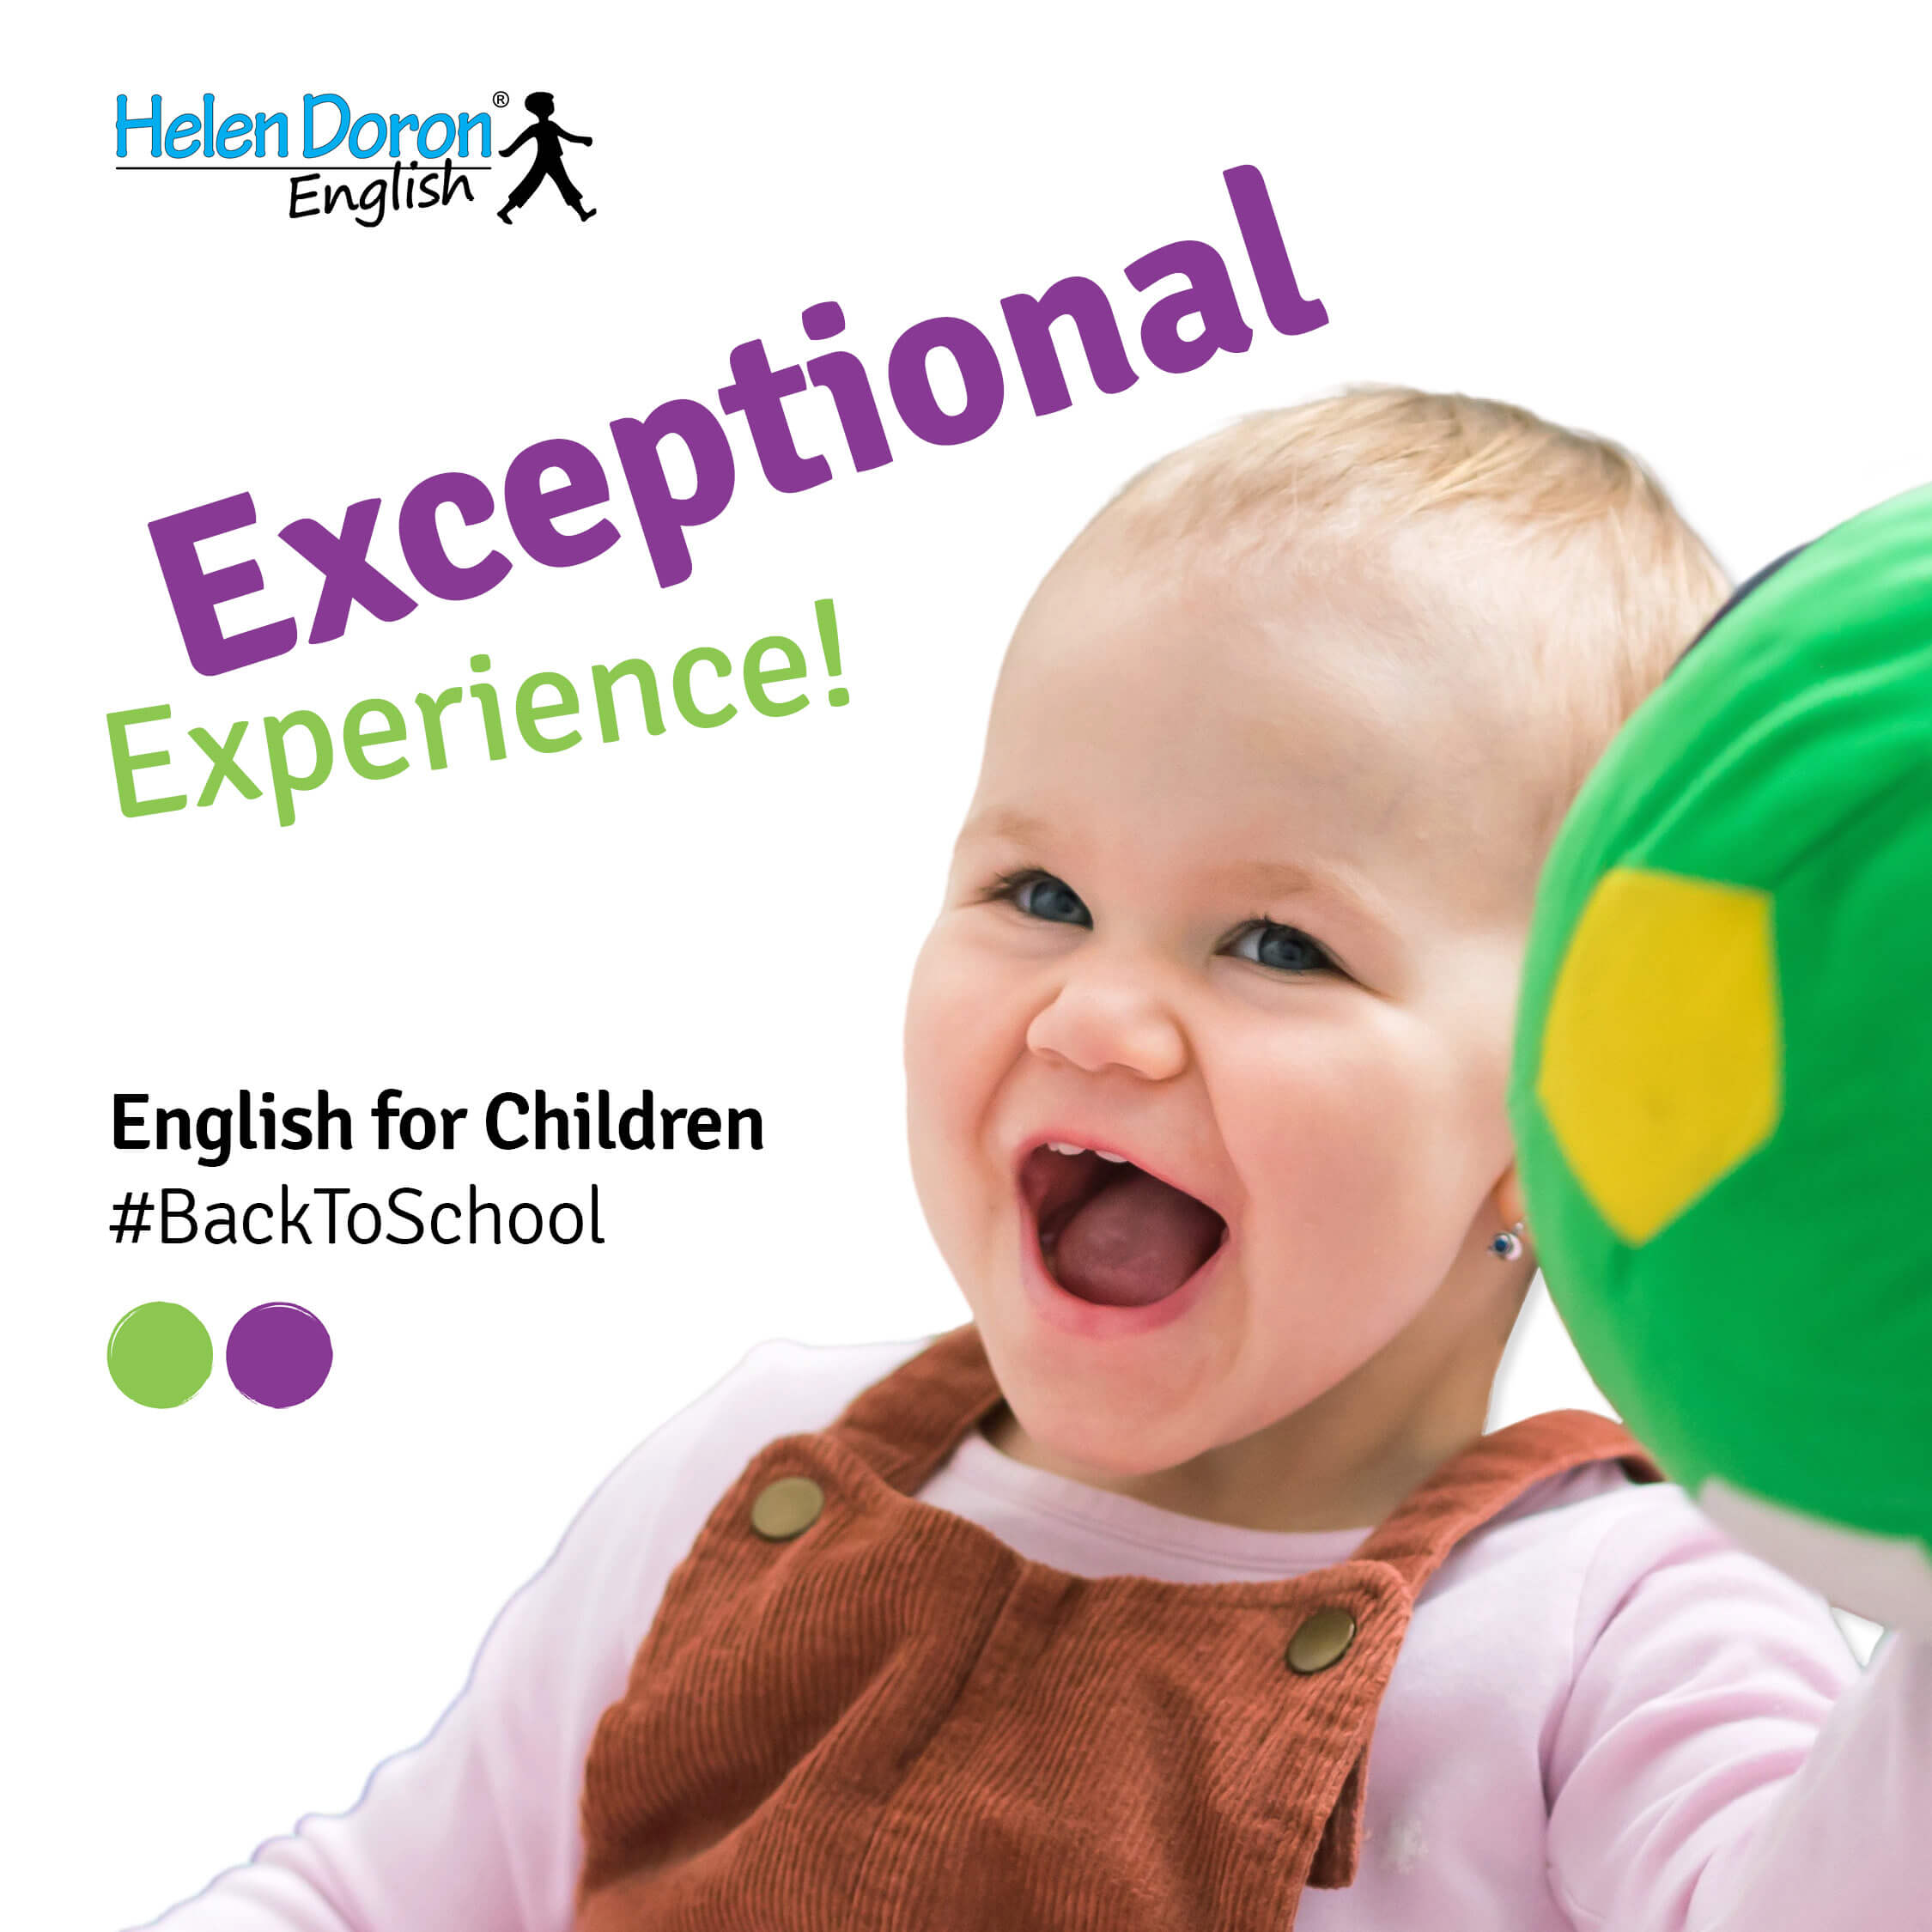 English for babies campaign for Back to School